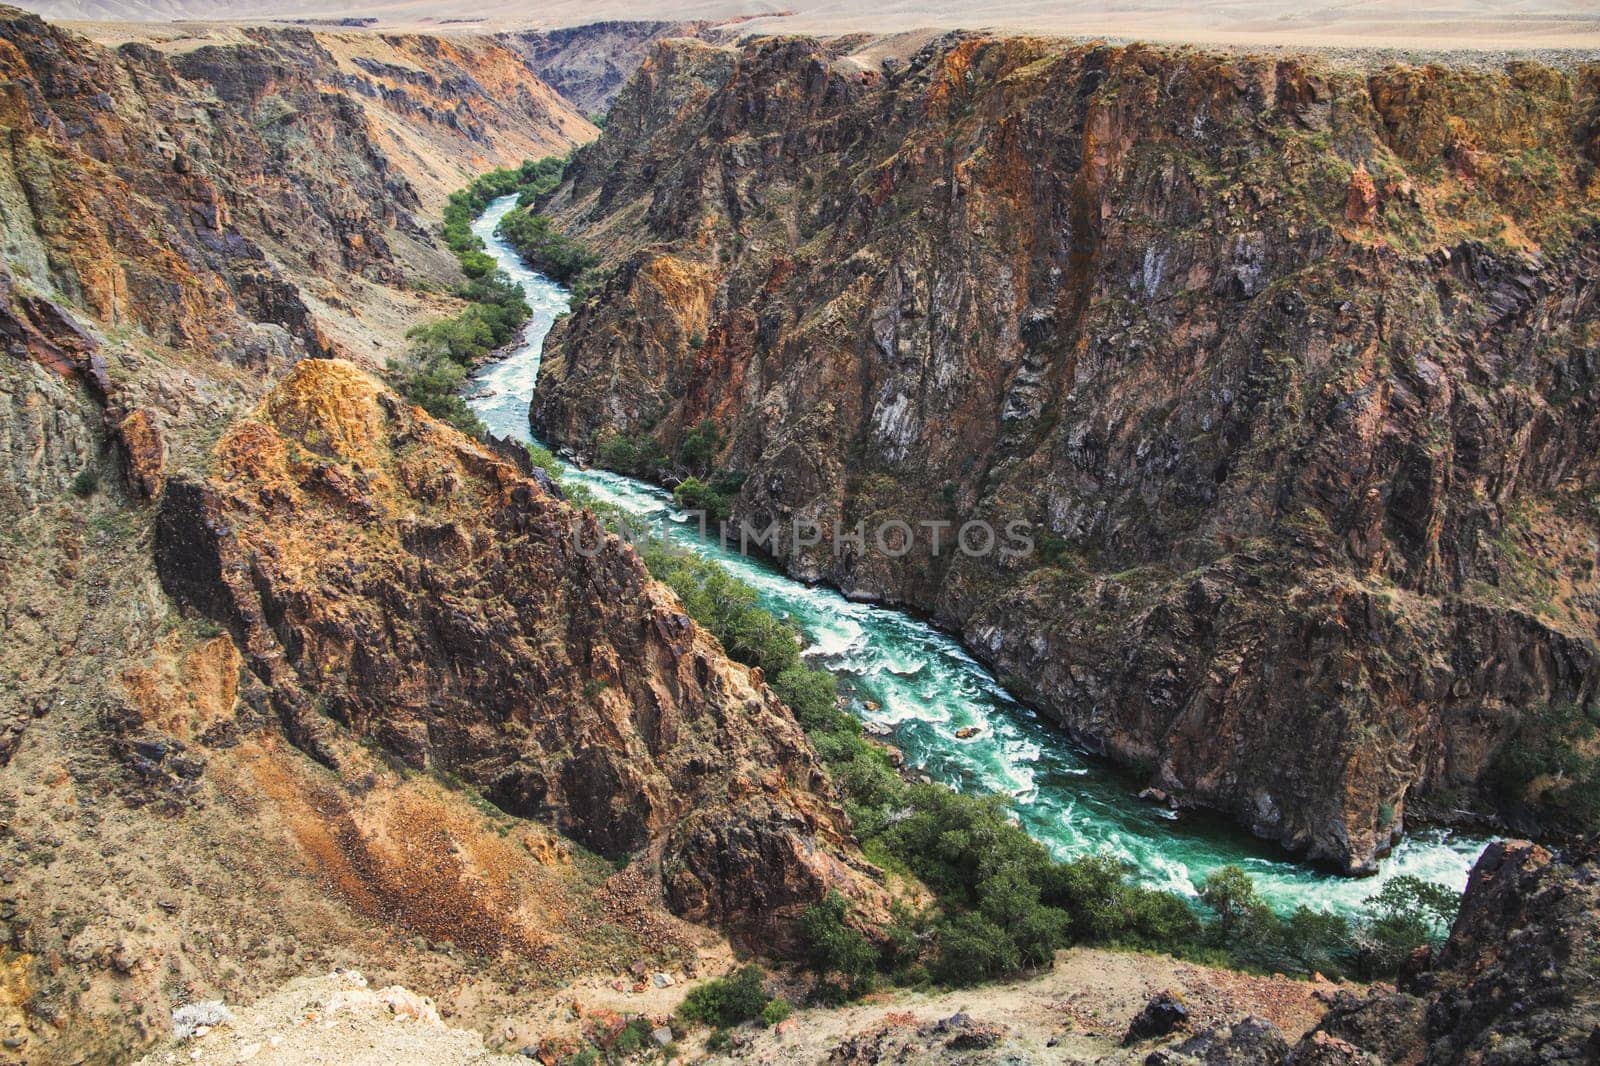 Top view of the Charyn river, in the gorge that flows through the Charyn canyon in Kazakhstan in the Almaty region, Nature of Central Asia.